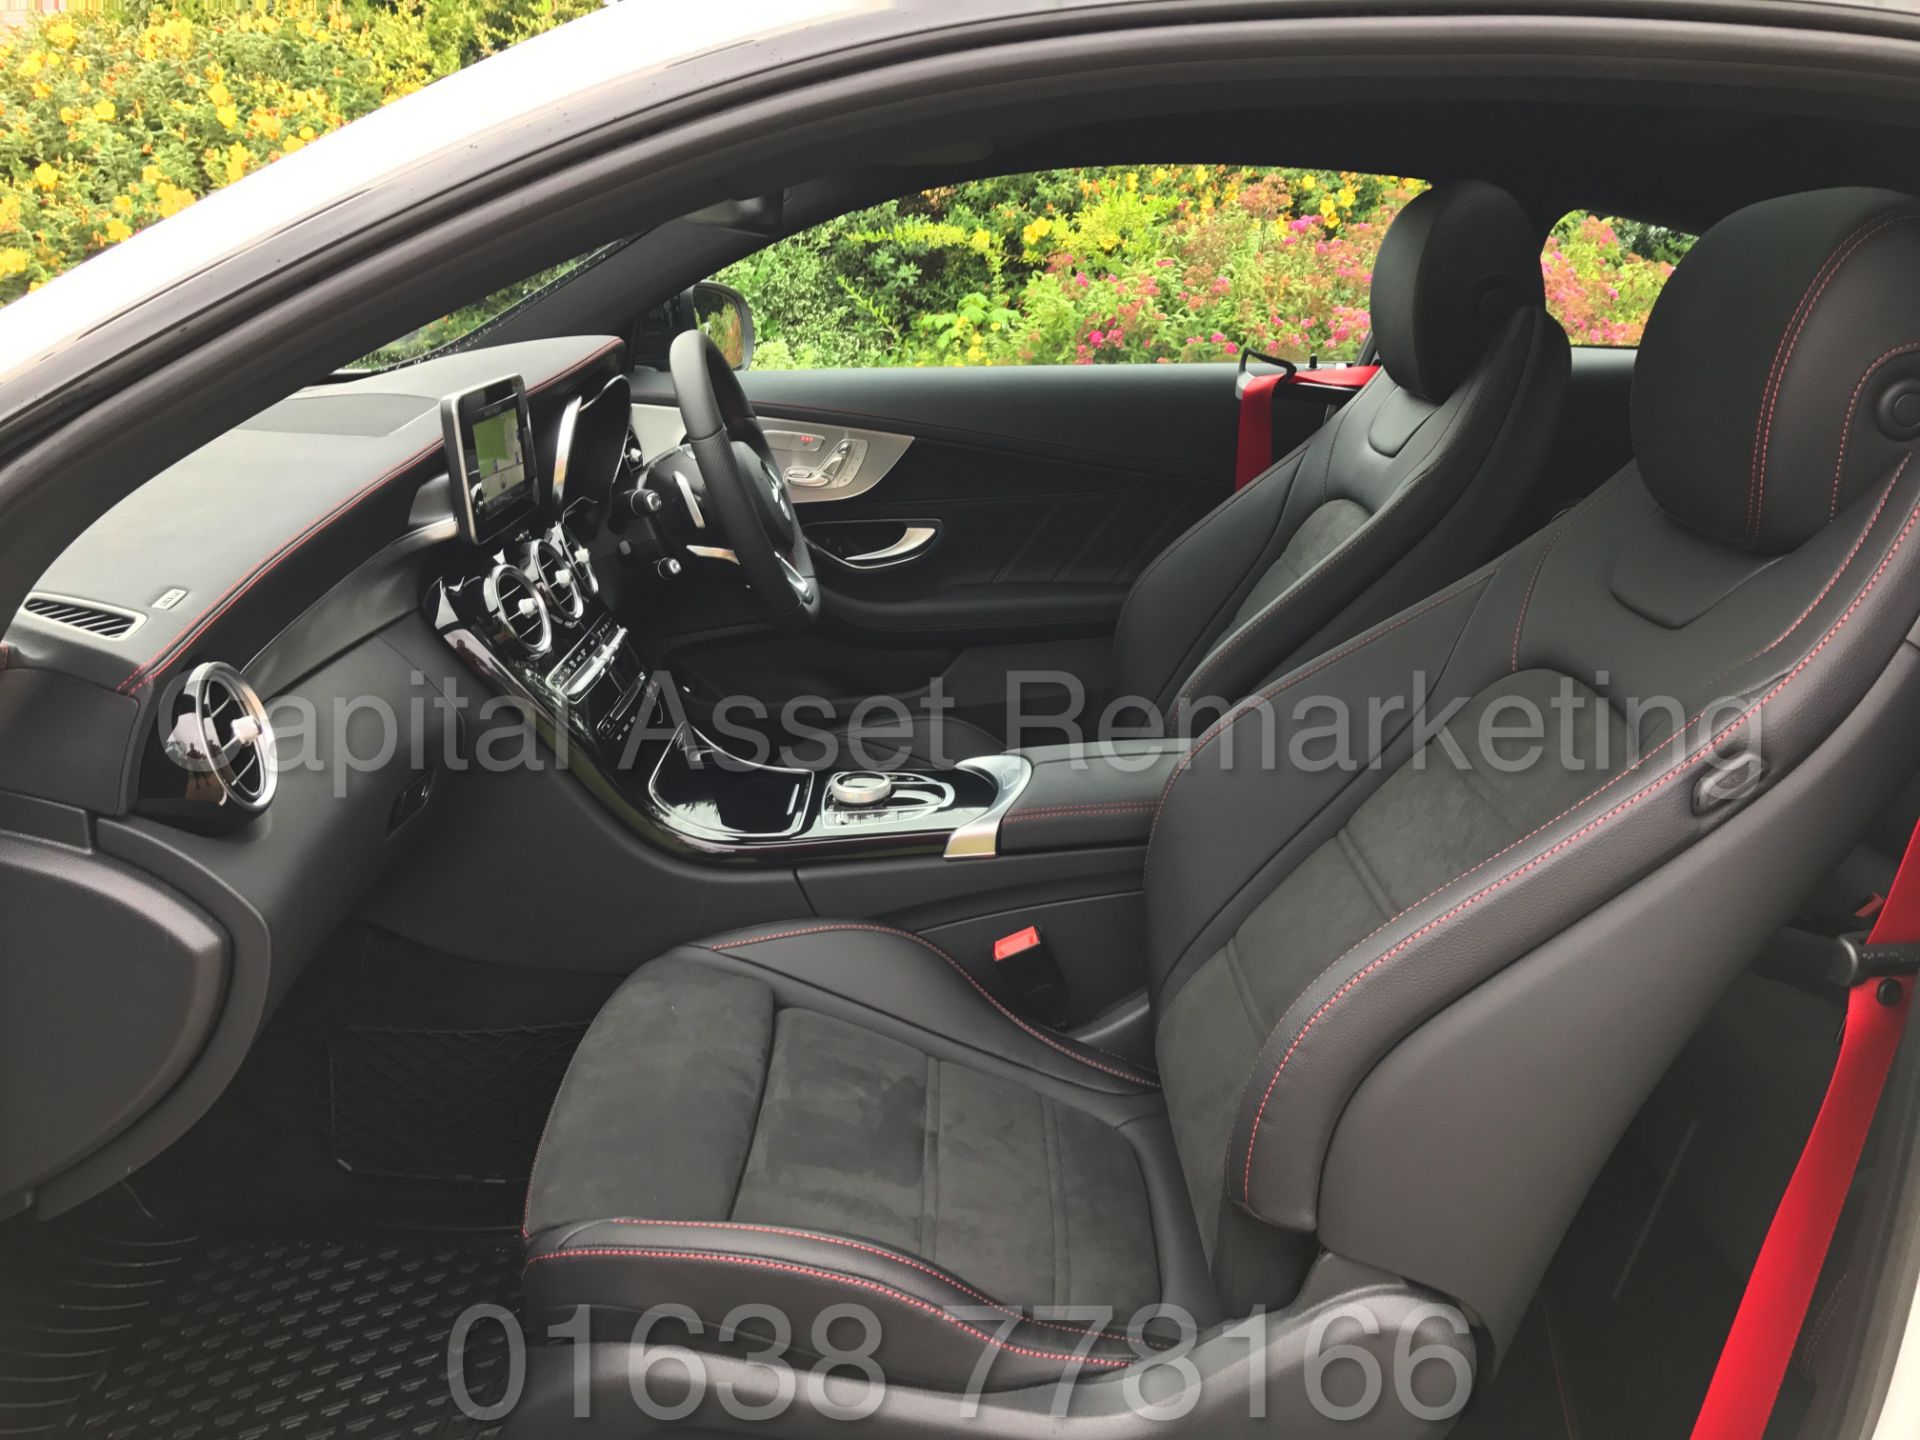 MEREDES-BENZ C43 AMG PREMIUM '4 MATIC' COUPE (2017) '9-G AUTO - LEATHER - SAT NAV' **FULLY LOADED** - Image 29 of 57